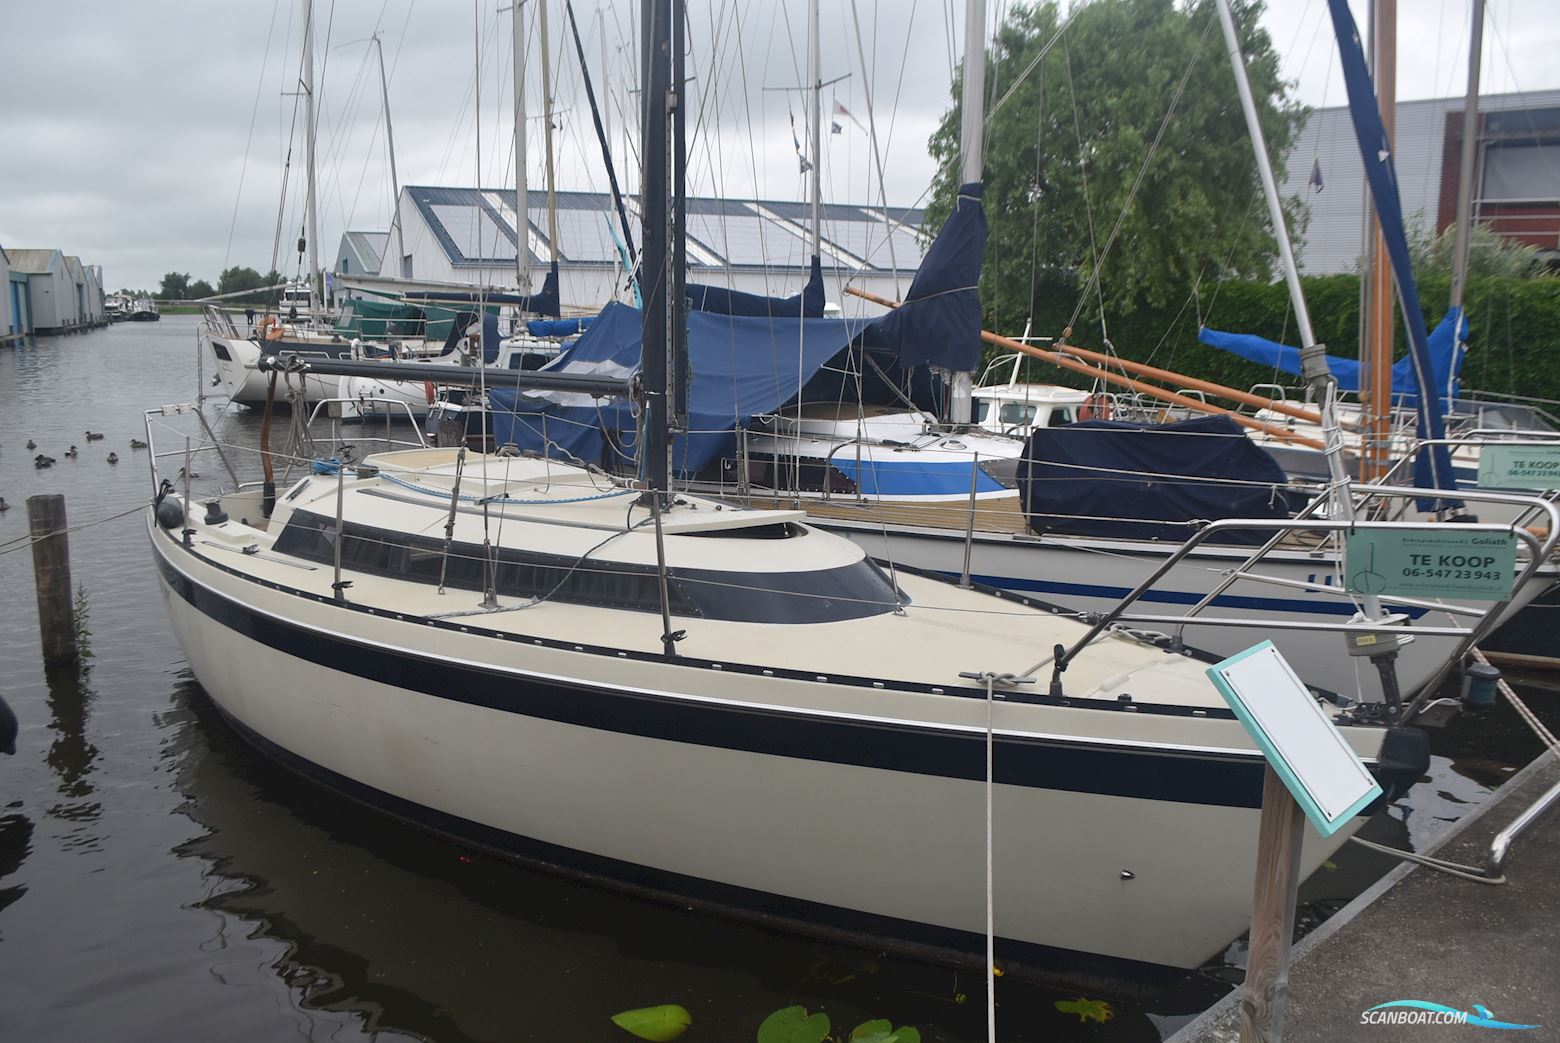 Friendship 28 Sailing boat 1983, with Volvo Penta engine, The Netherlands